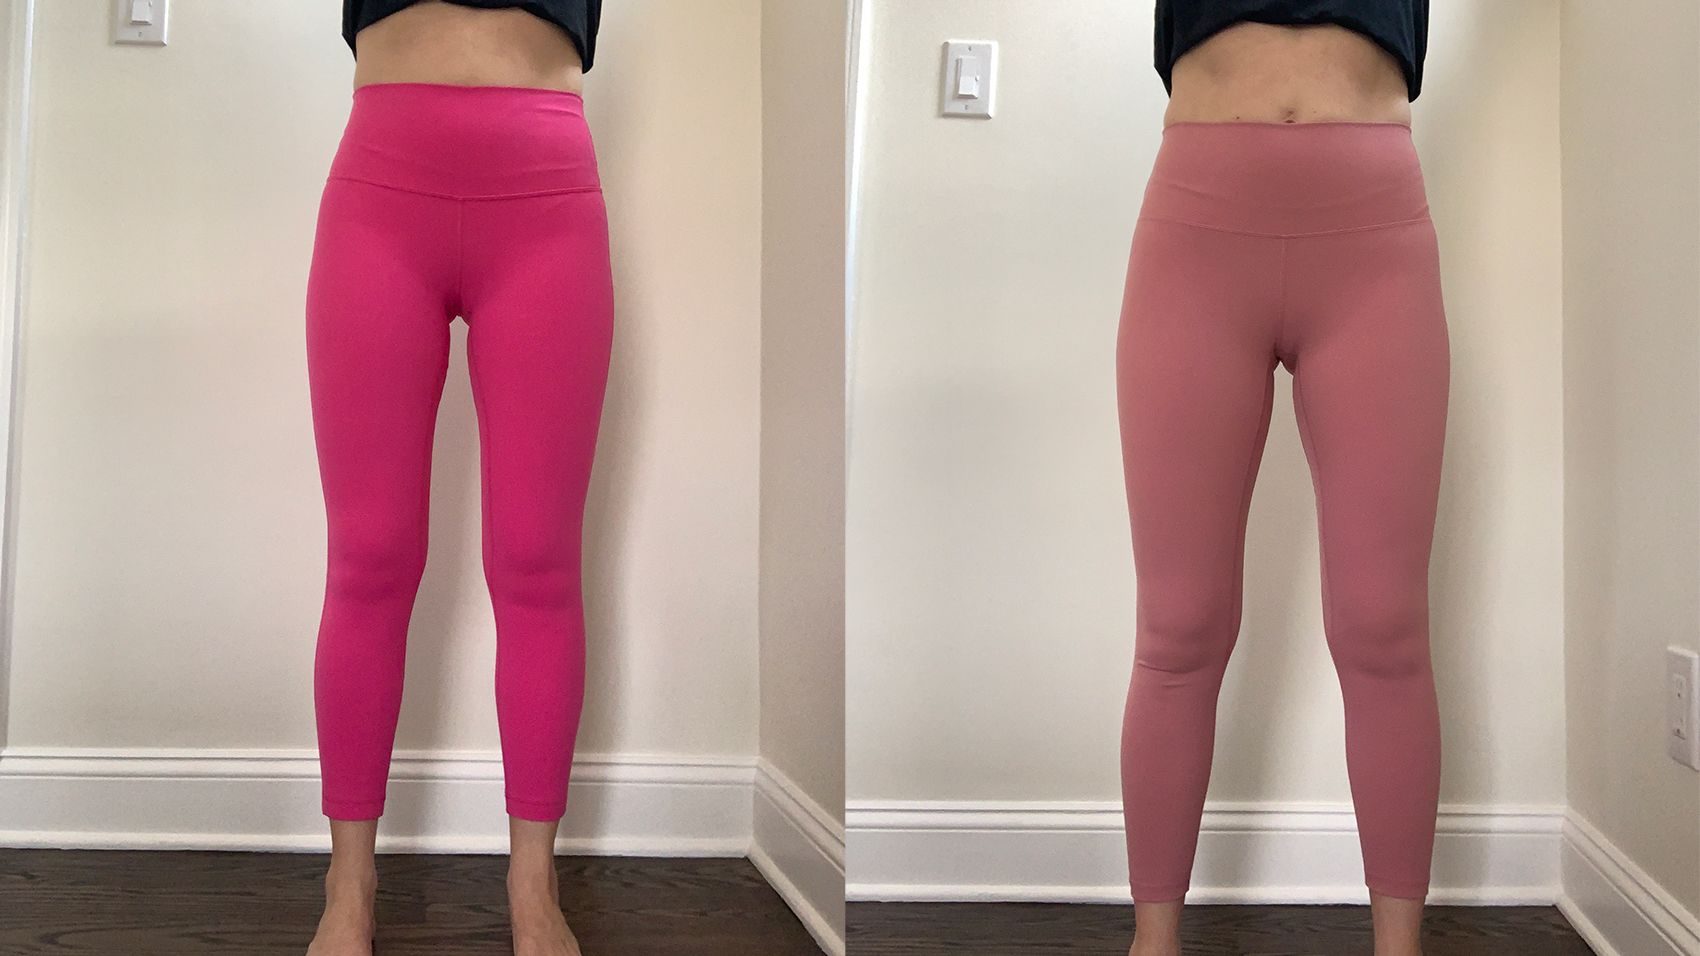 See-Through Yoga Pants or Not, LULU Still a 'Buy': Pros